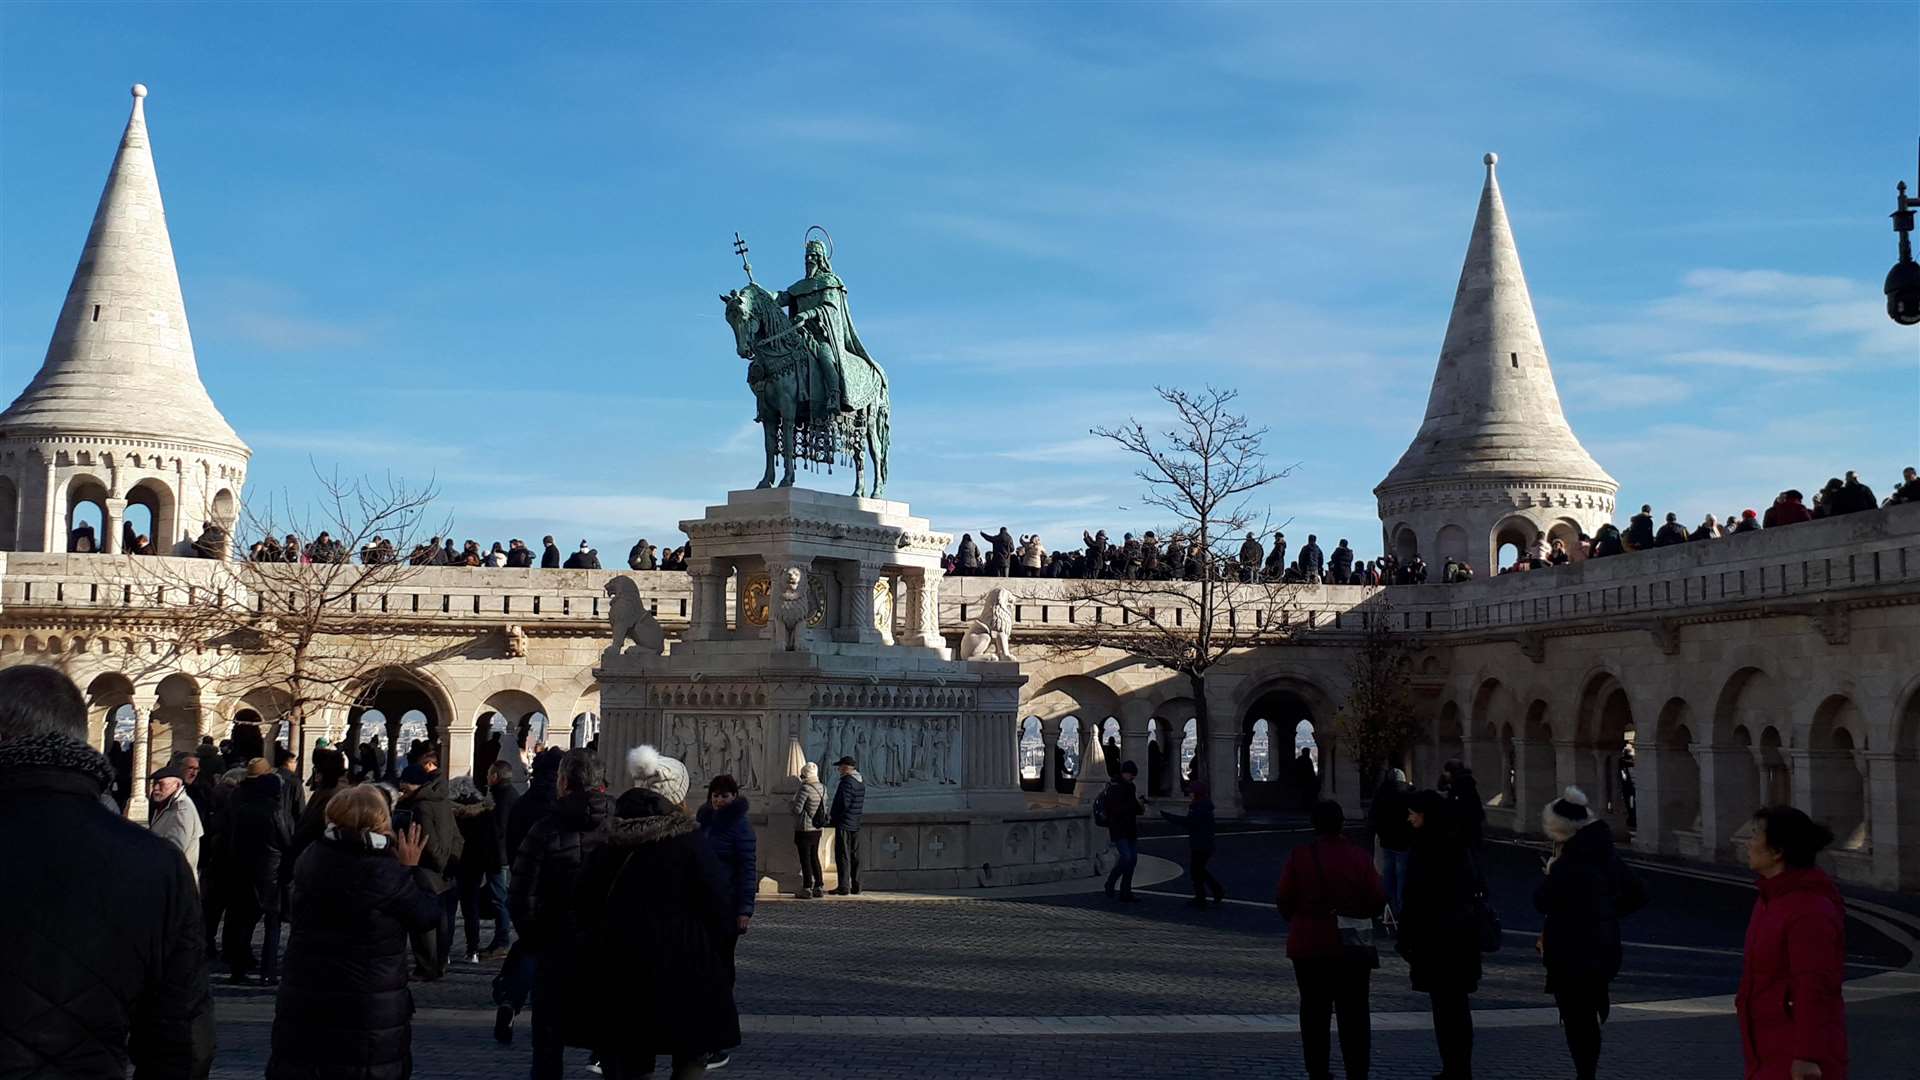 Marriage proposals often take place at The Fisherman's Bastion.